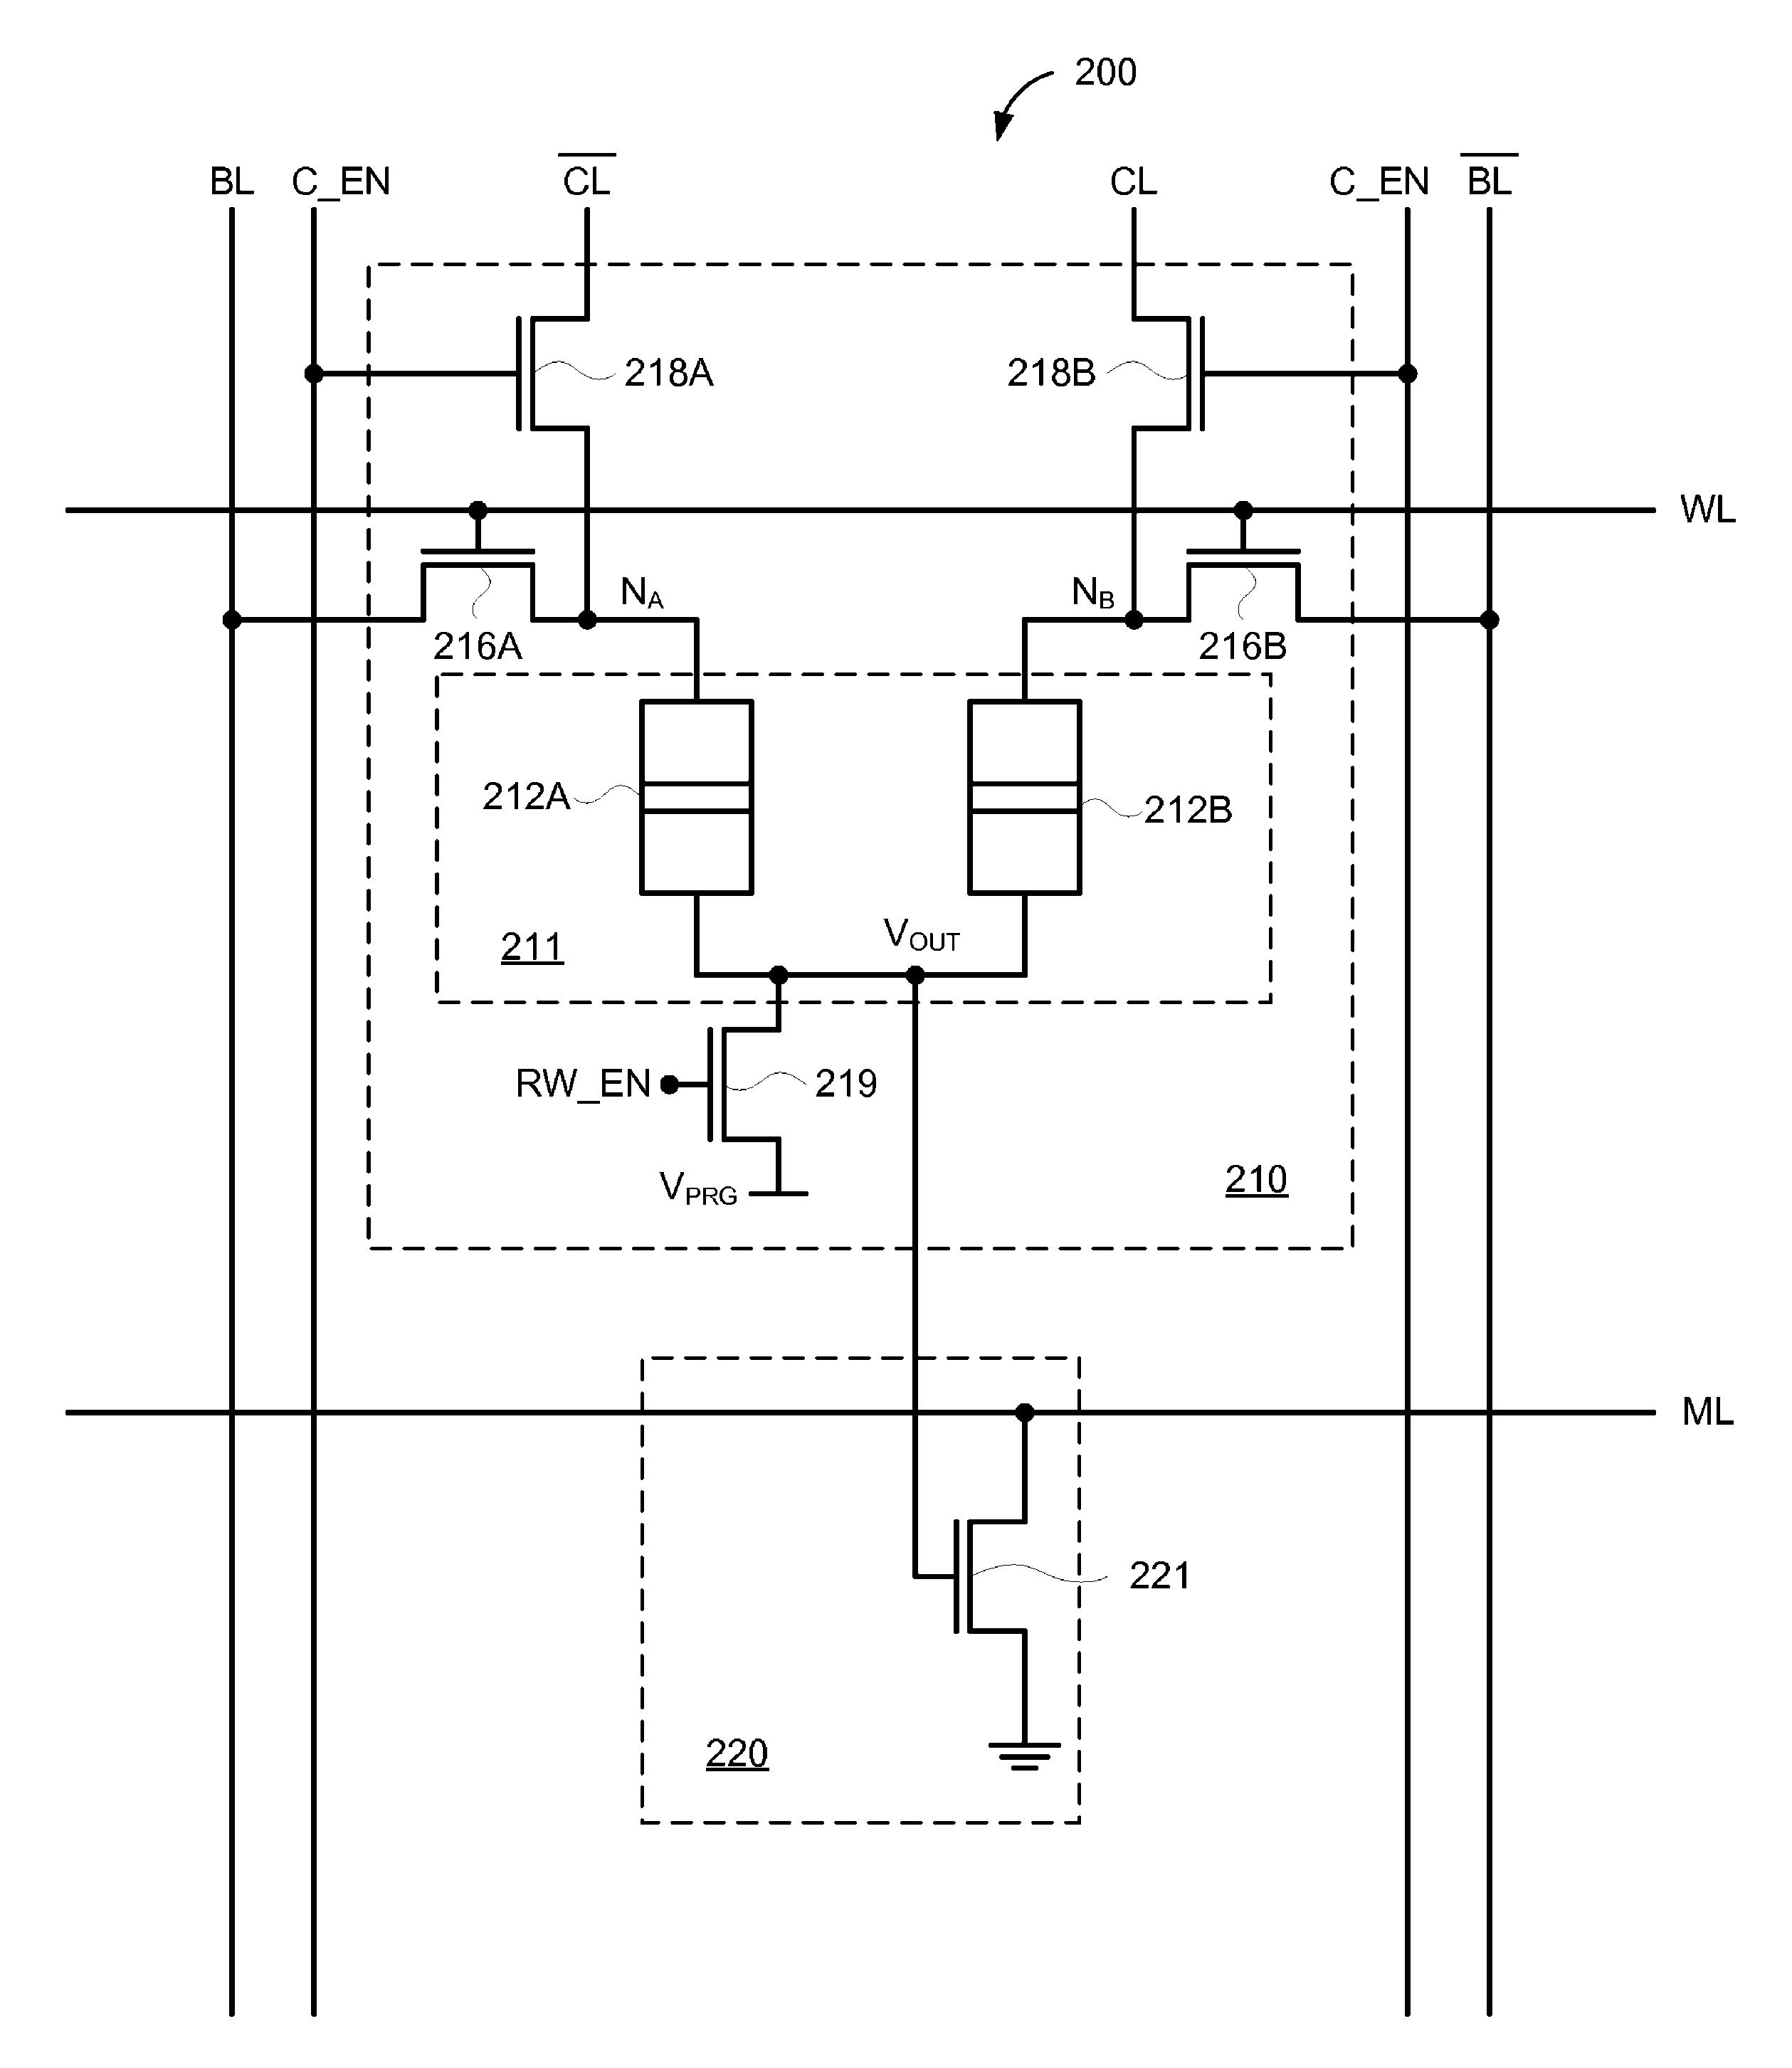 Content addressable memory device having spin torque transfer memory cells